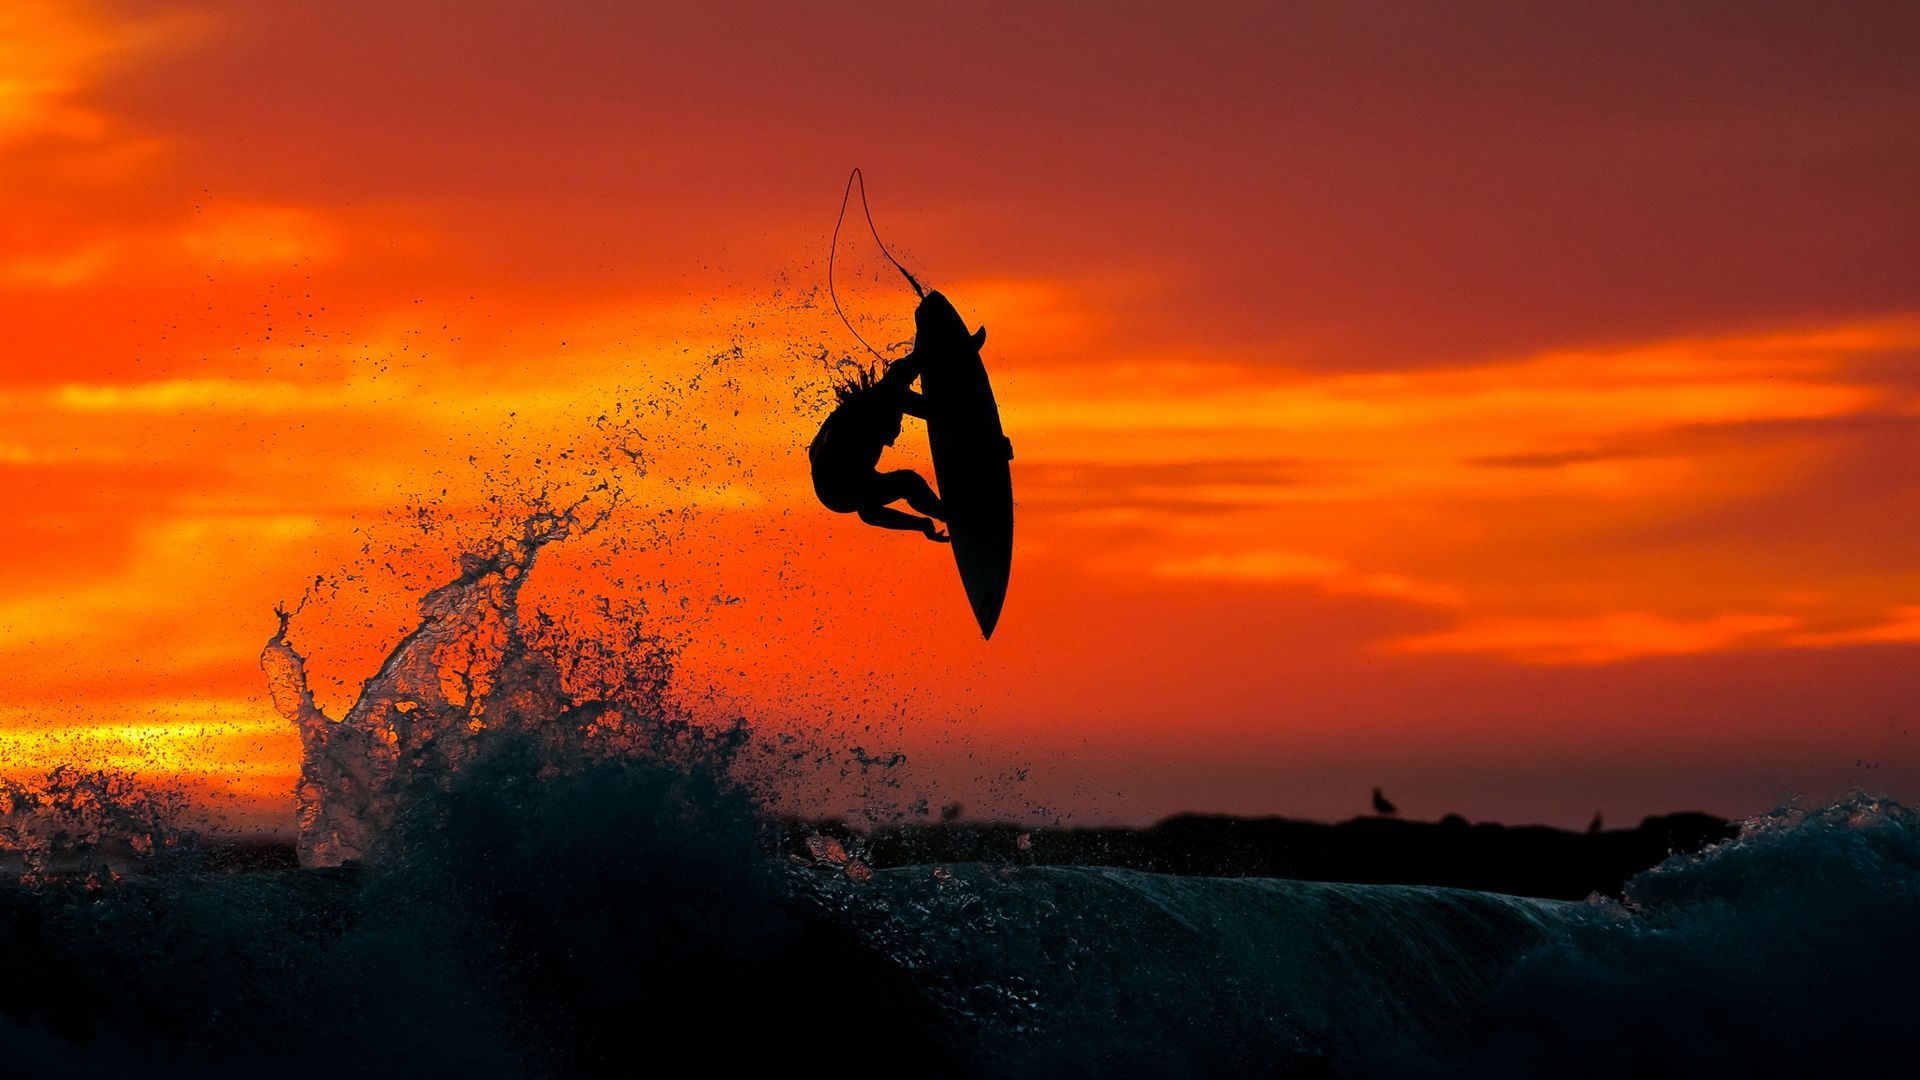 202 Surfing HD Wallpapers Backgrounds - Wallpaper Abyss